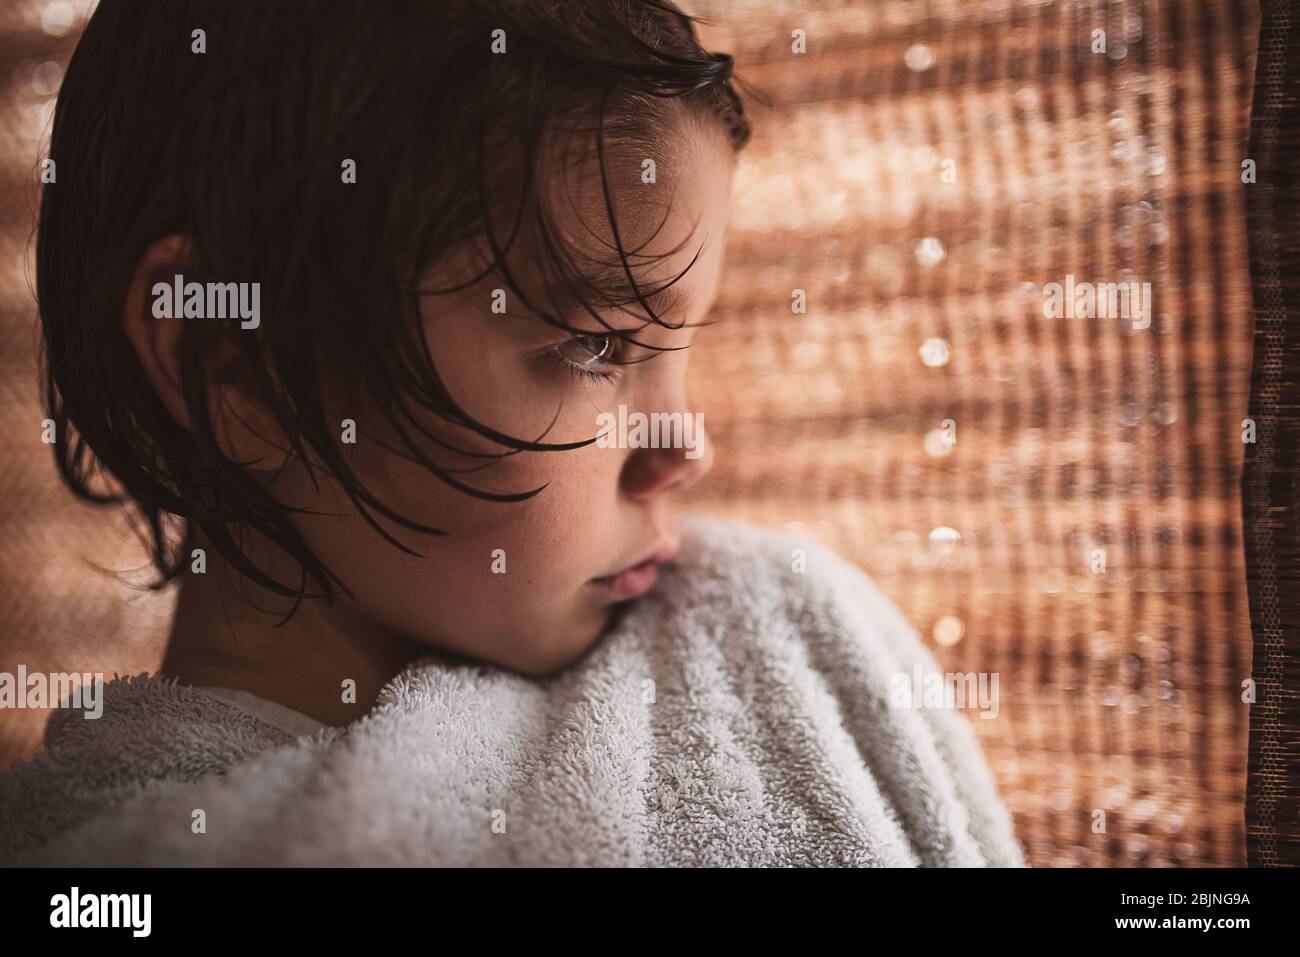 Close-up of a boy wrapped in a towel after a bath Stock Photo